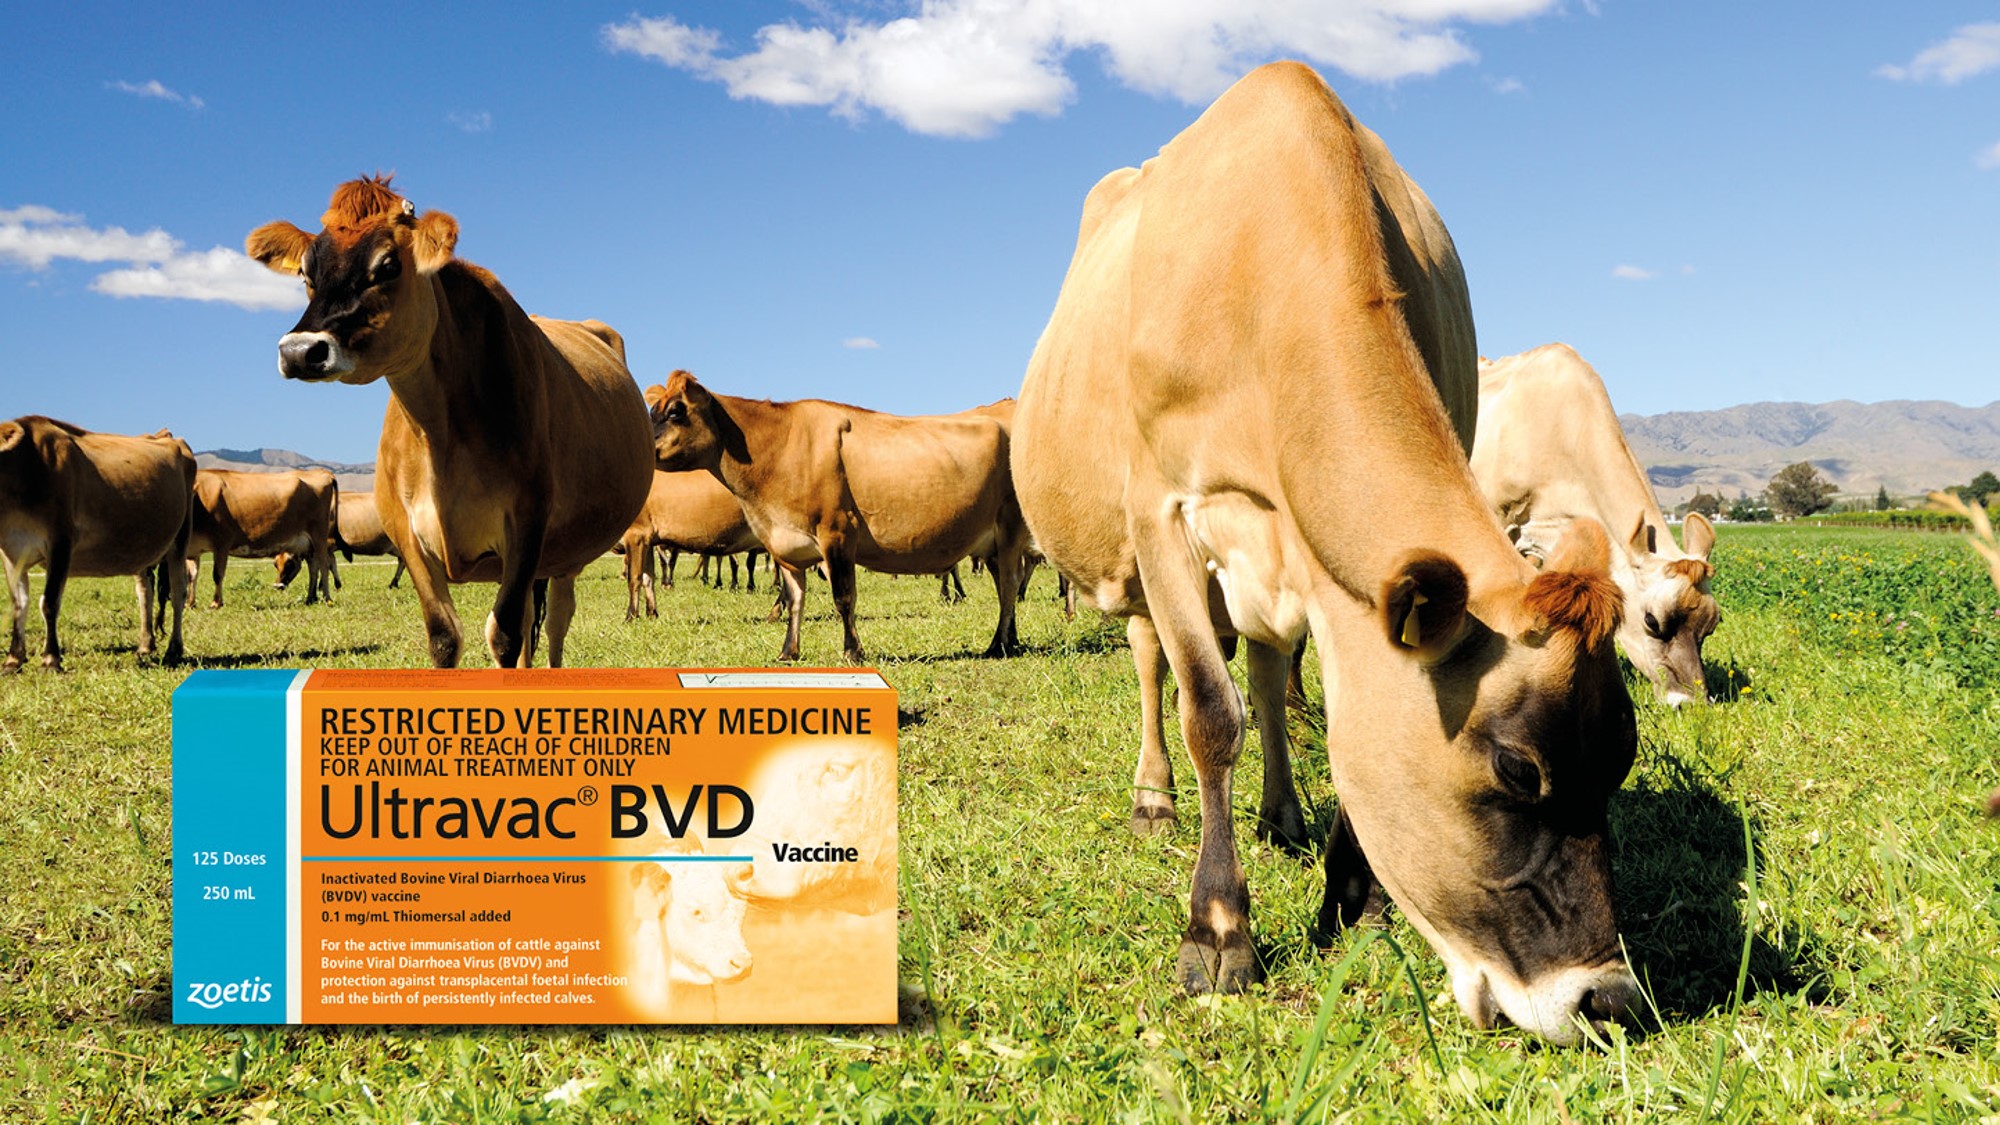 WHAT IS BVD AND HOW DOES IT AFFECT MY FARM